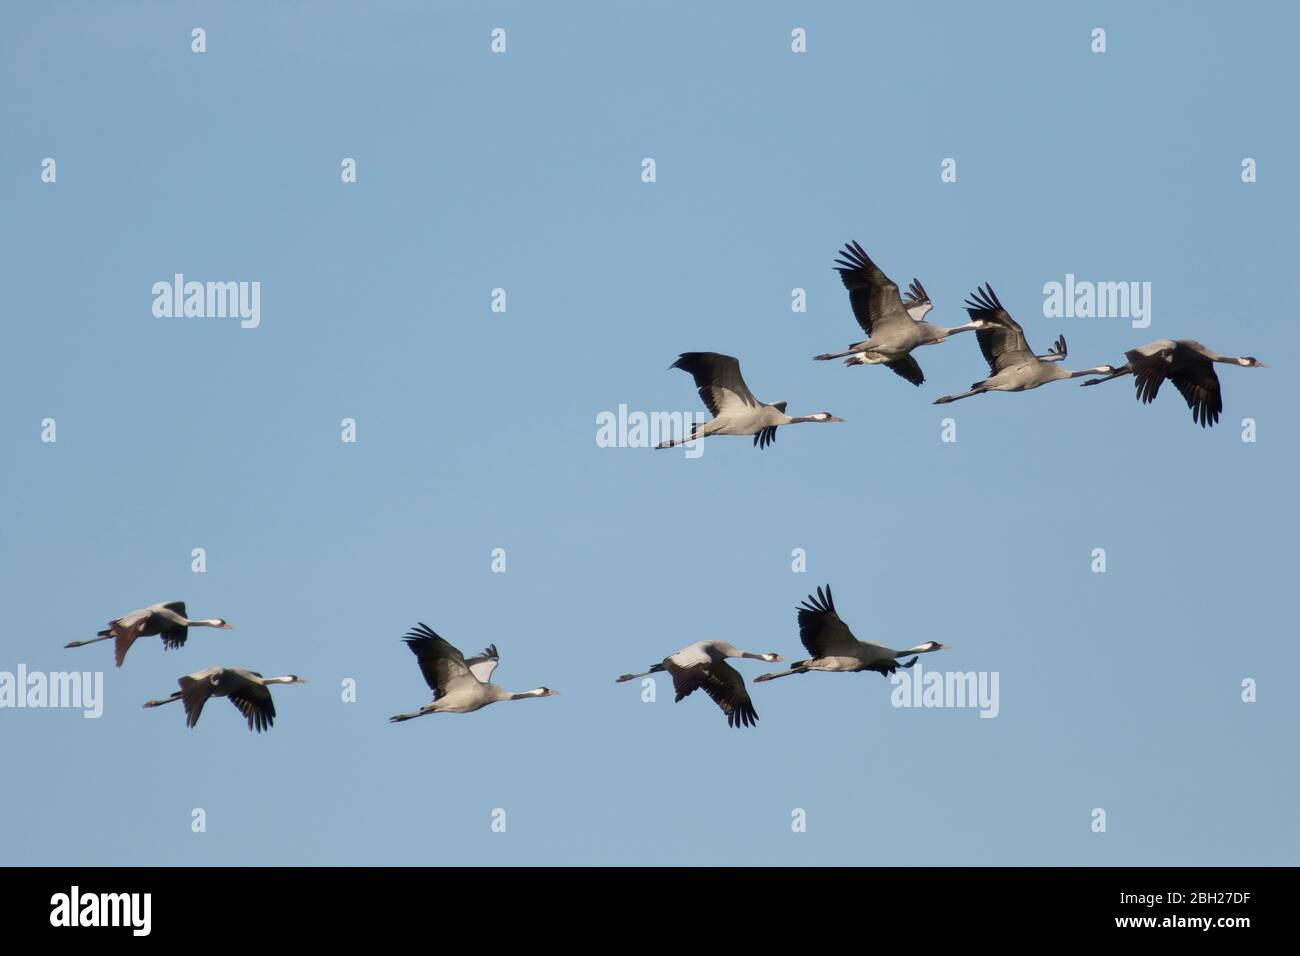 Germany, Flock of common cranes (Grus grus) flying against clear blue sky Stock Photo